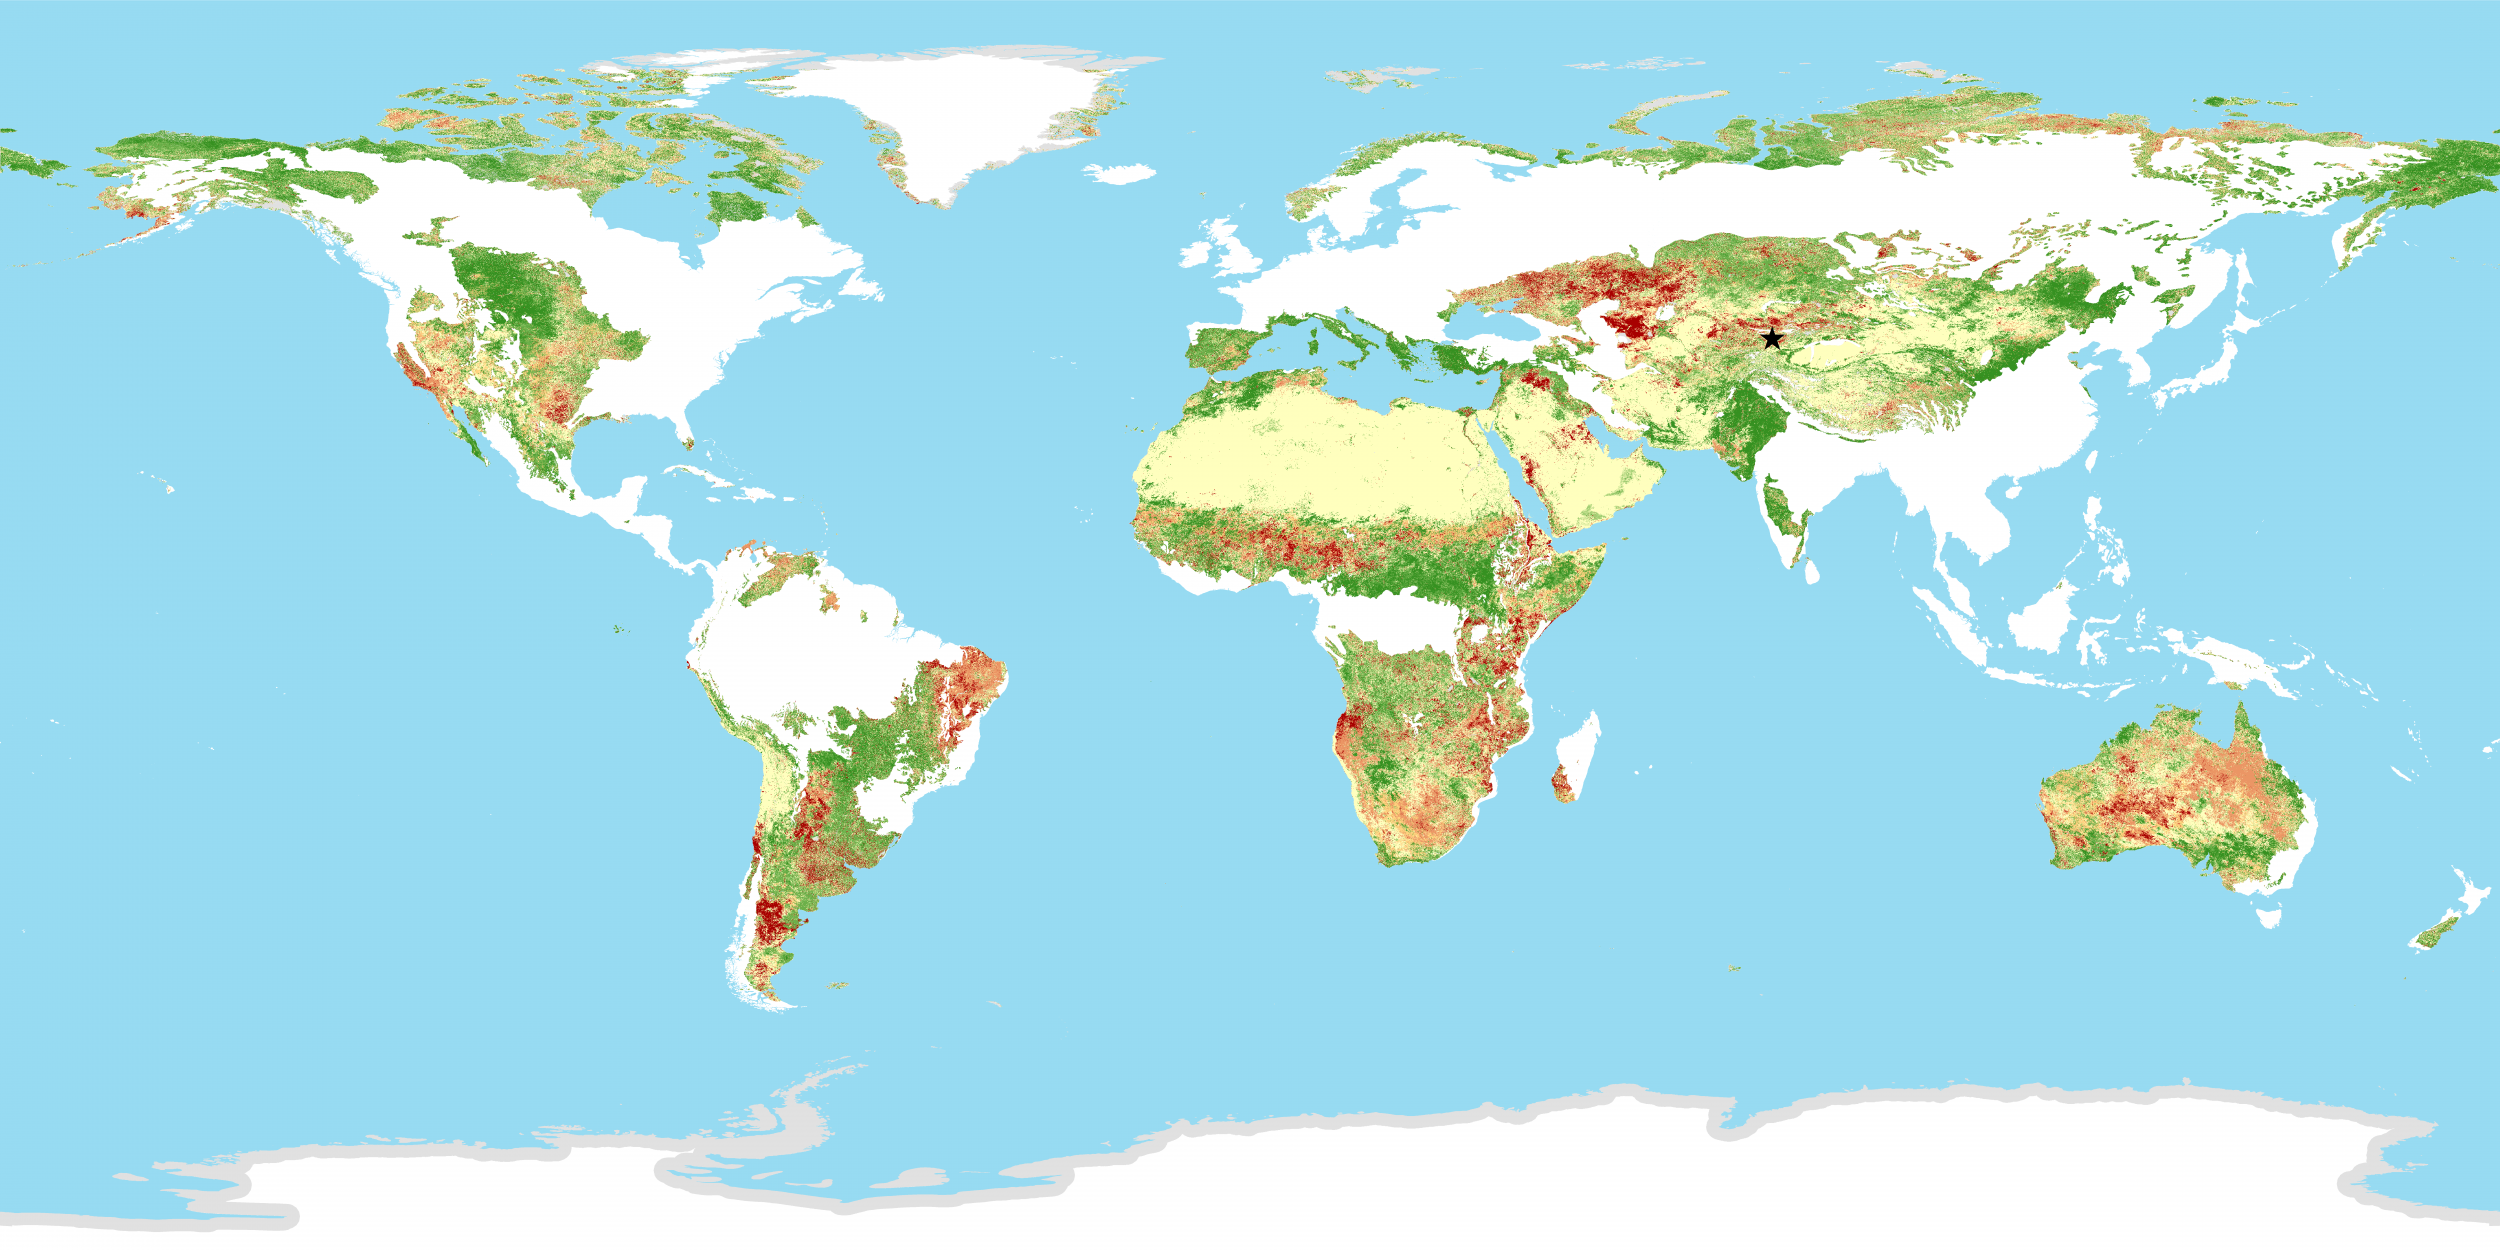 Land productivity changes over the period 2001-2015 in rangelands